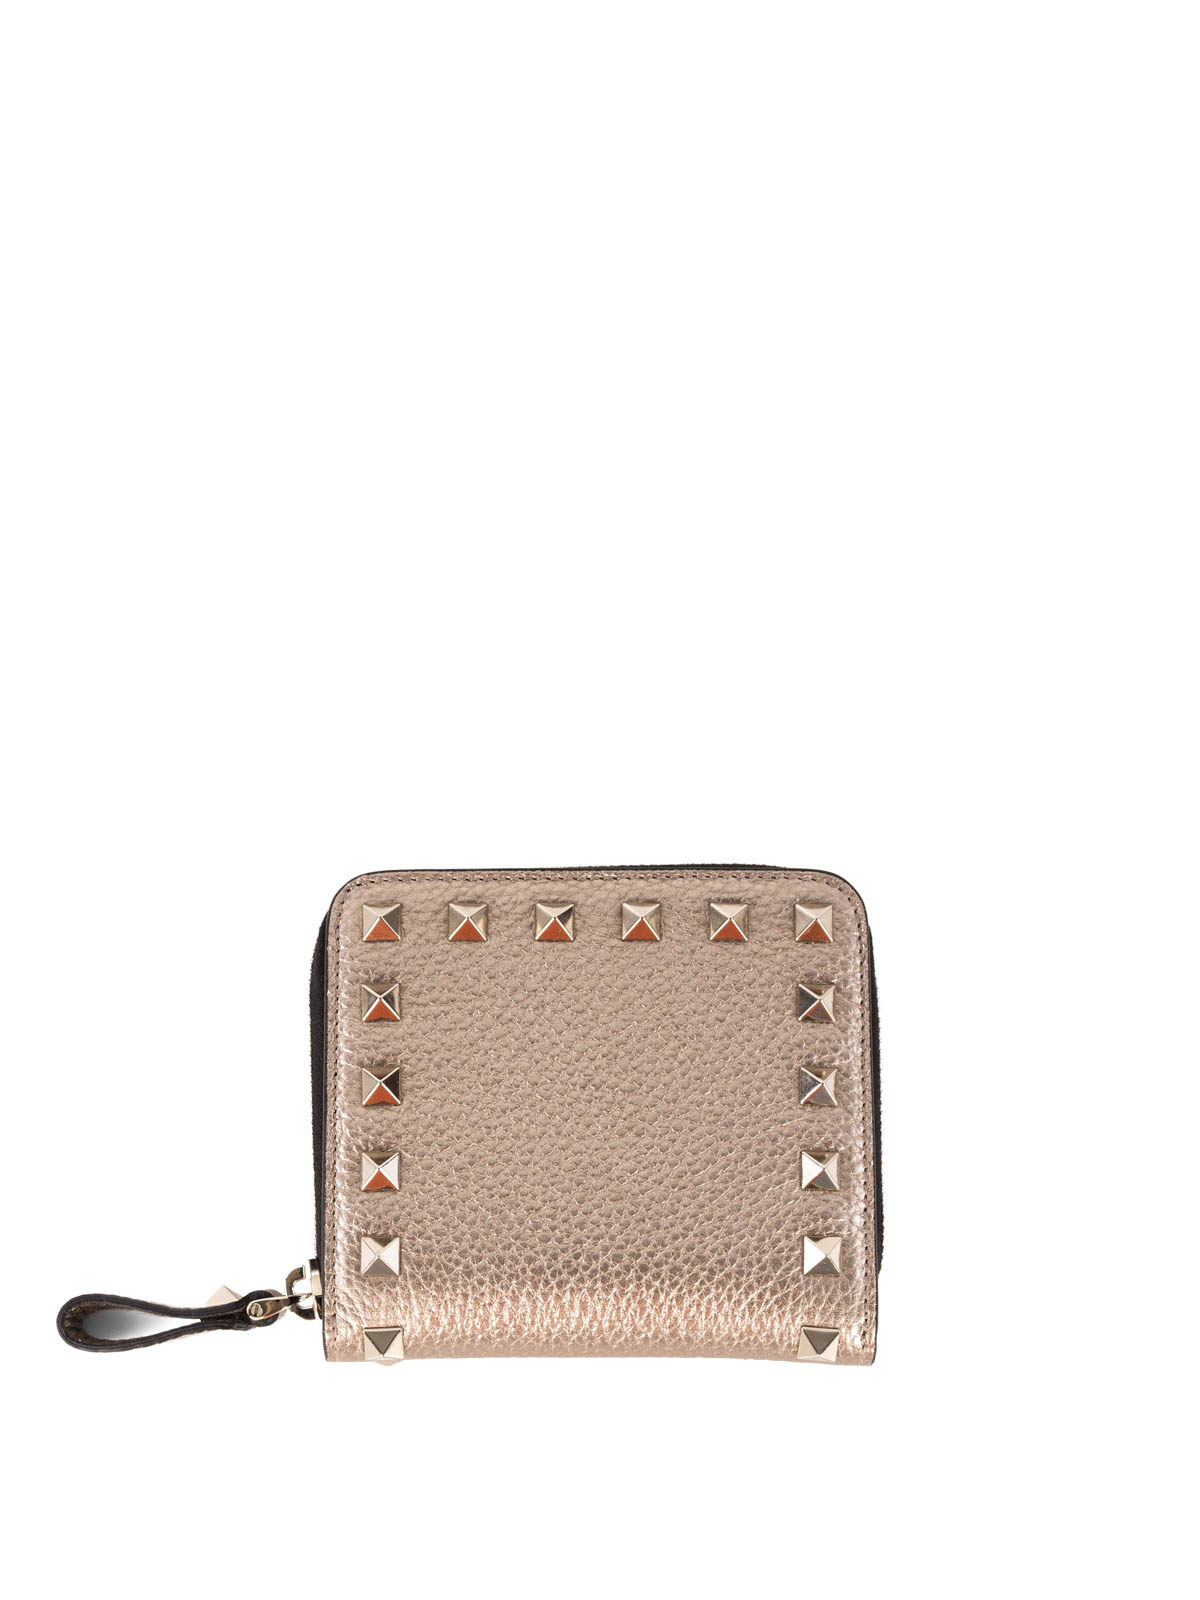 Rockstud Grainy Calfskin Cardholder With Zip for Woman in Poudre